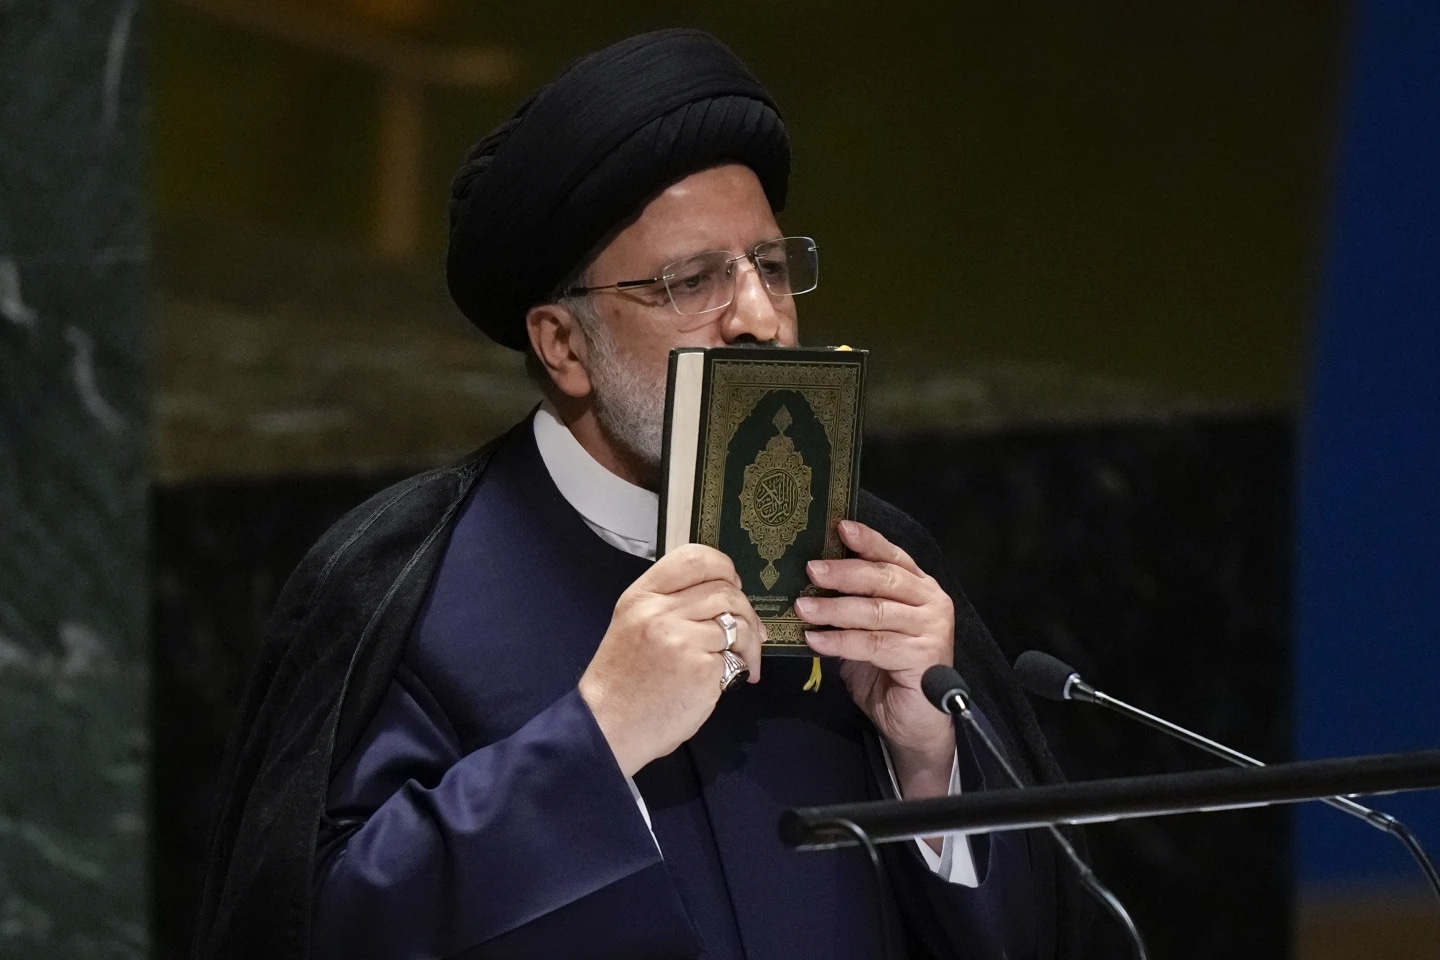 Iranian Leader Tells Biden Commit to 2015 Nuclear Accords or Walk Away